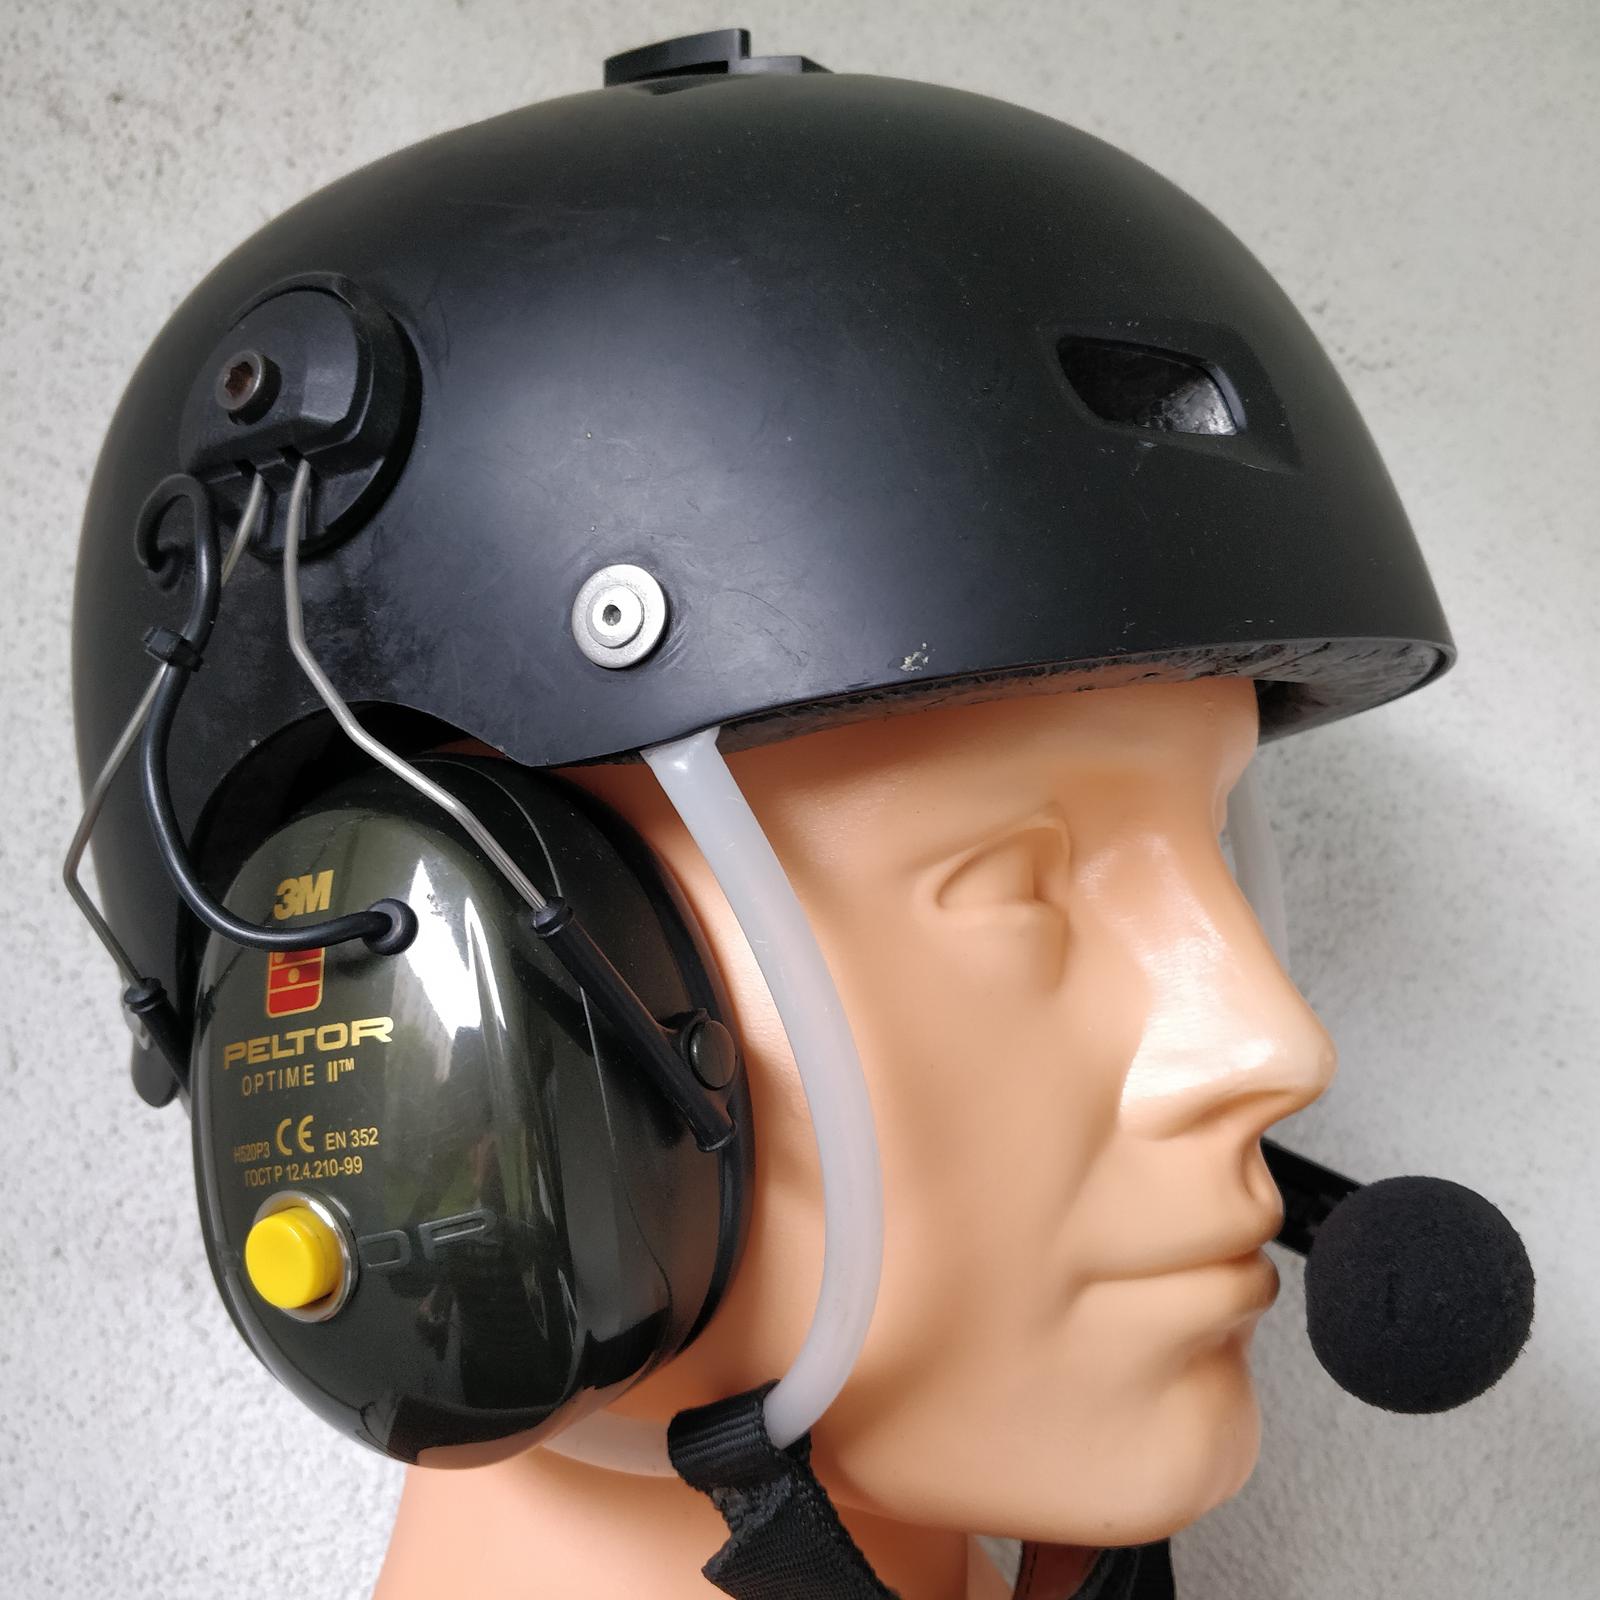 Best helicopter headset 1